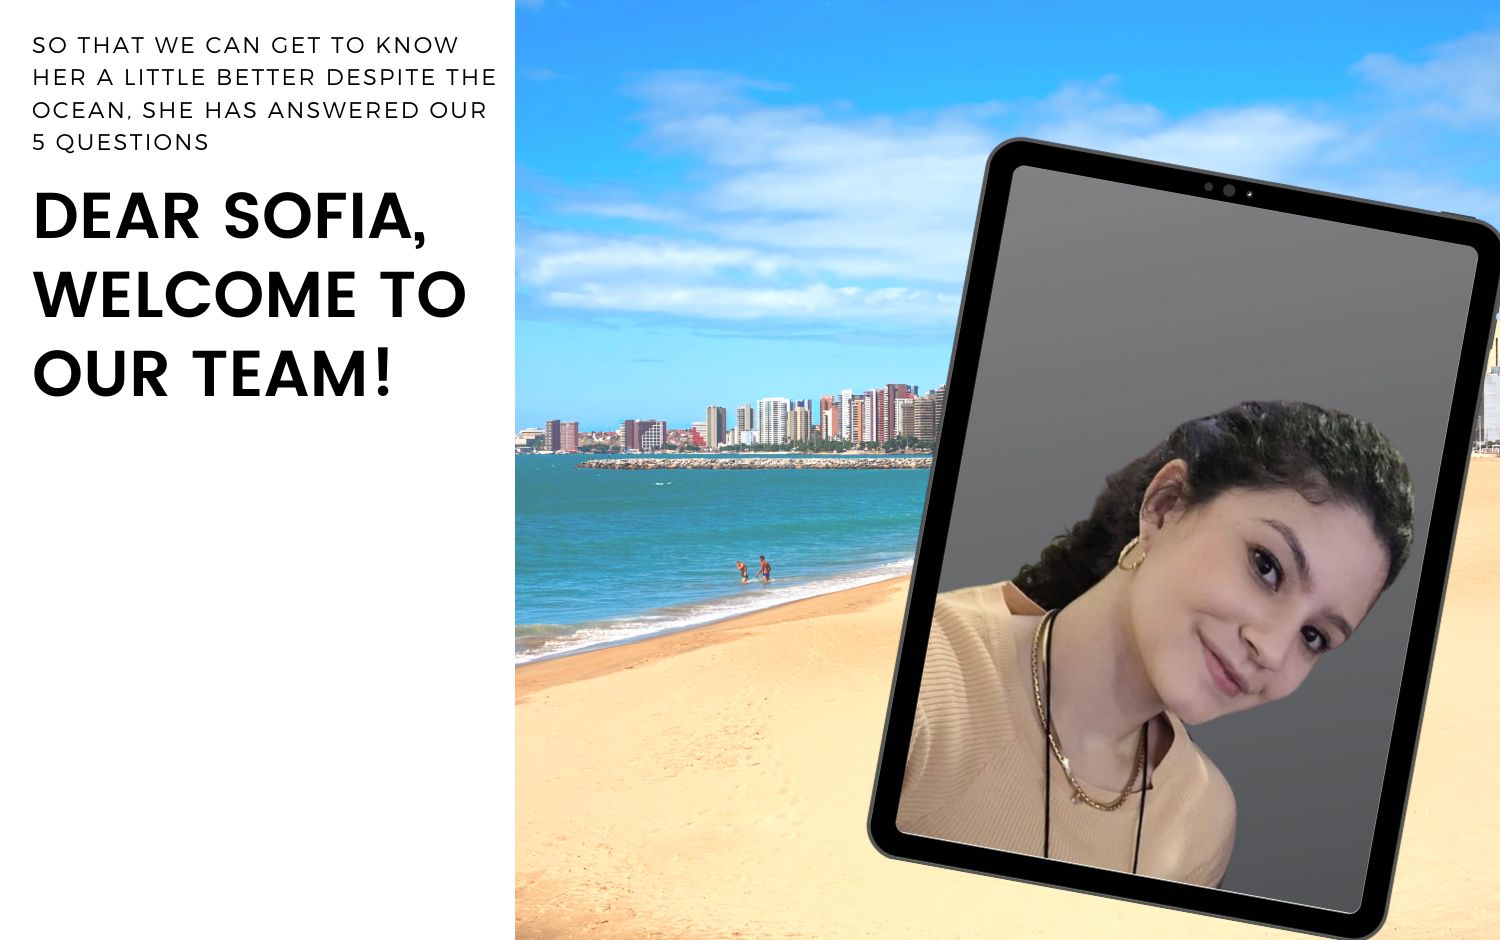 5 Questions for Sofia